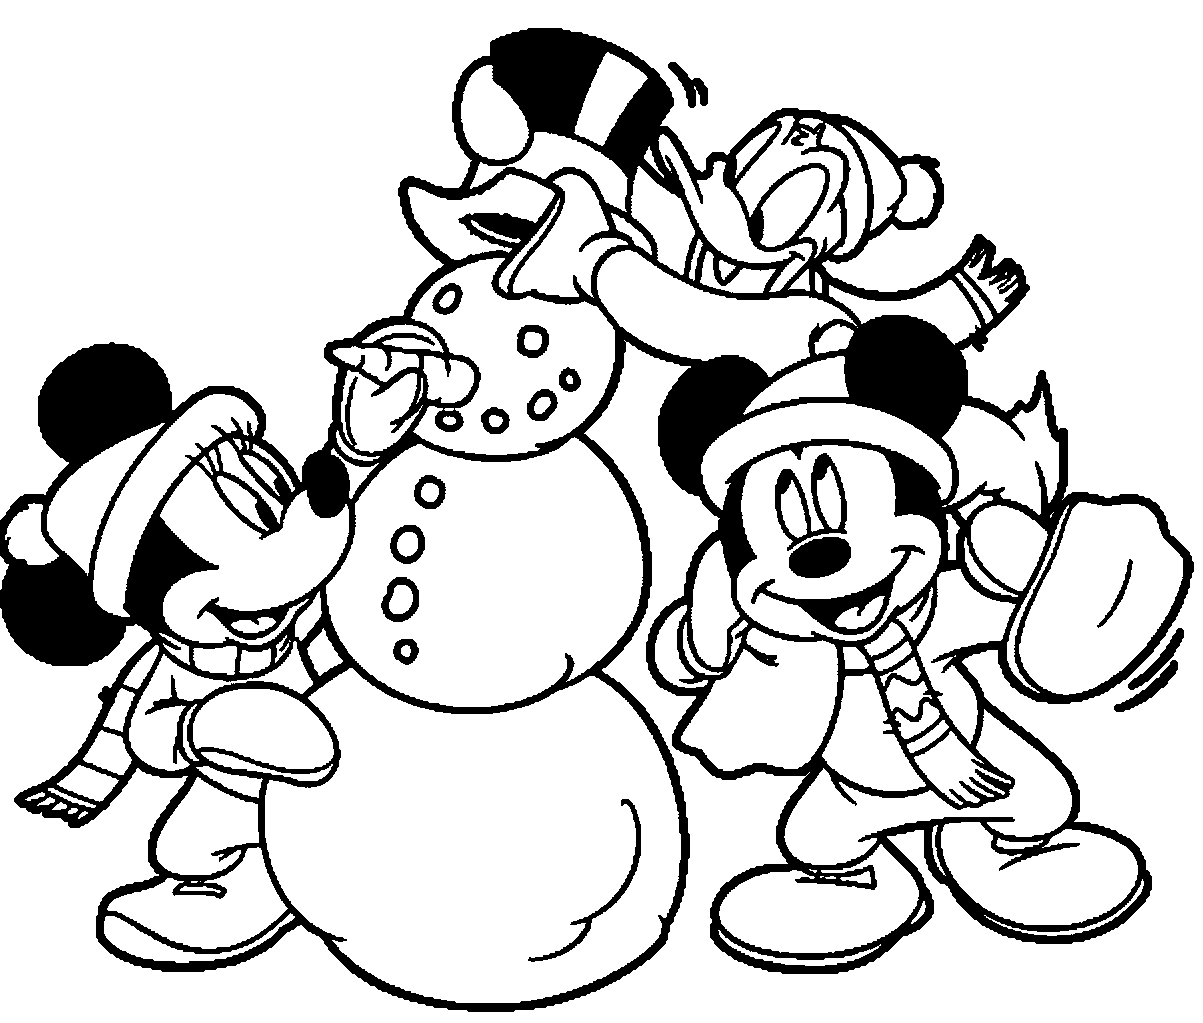 Winter Wonderland Coloring Pages For Kids Drawing with Crayons